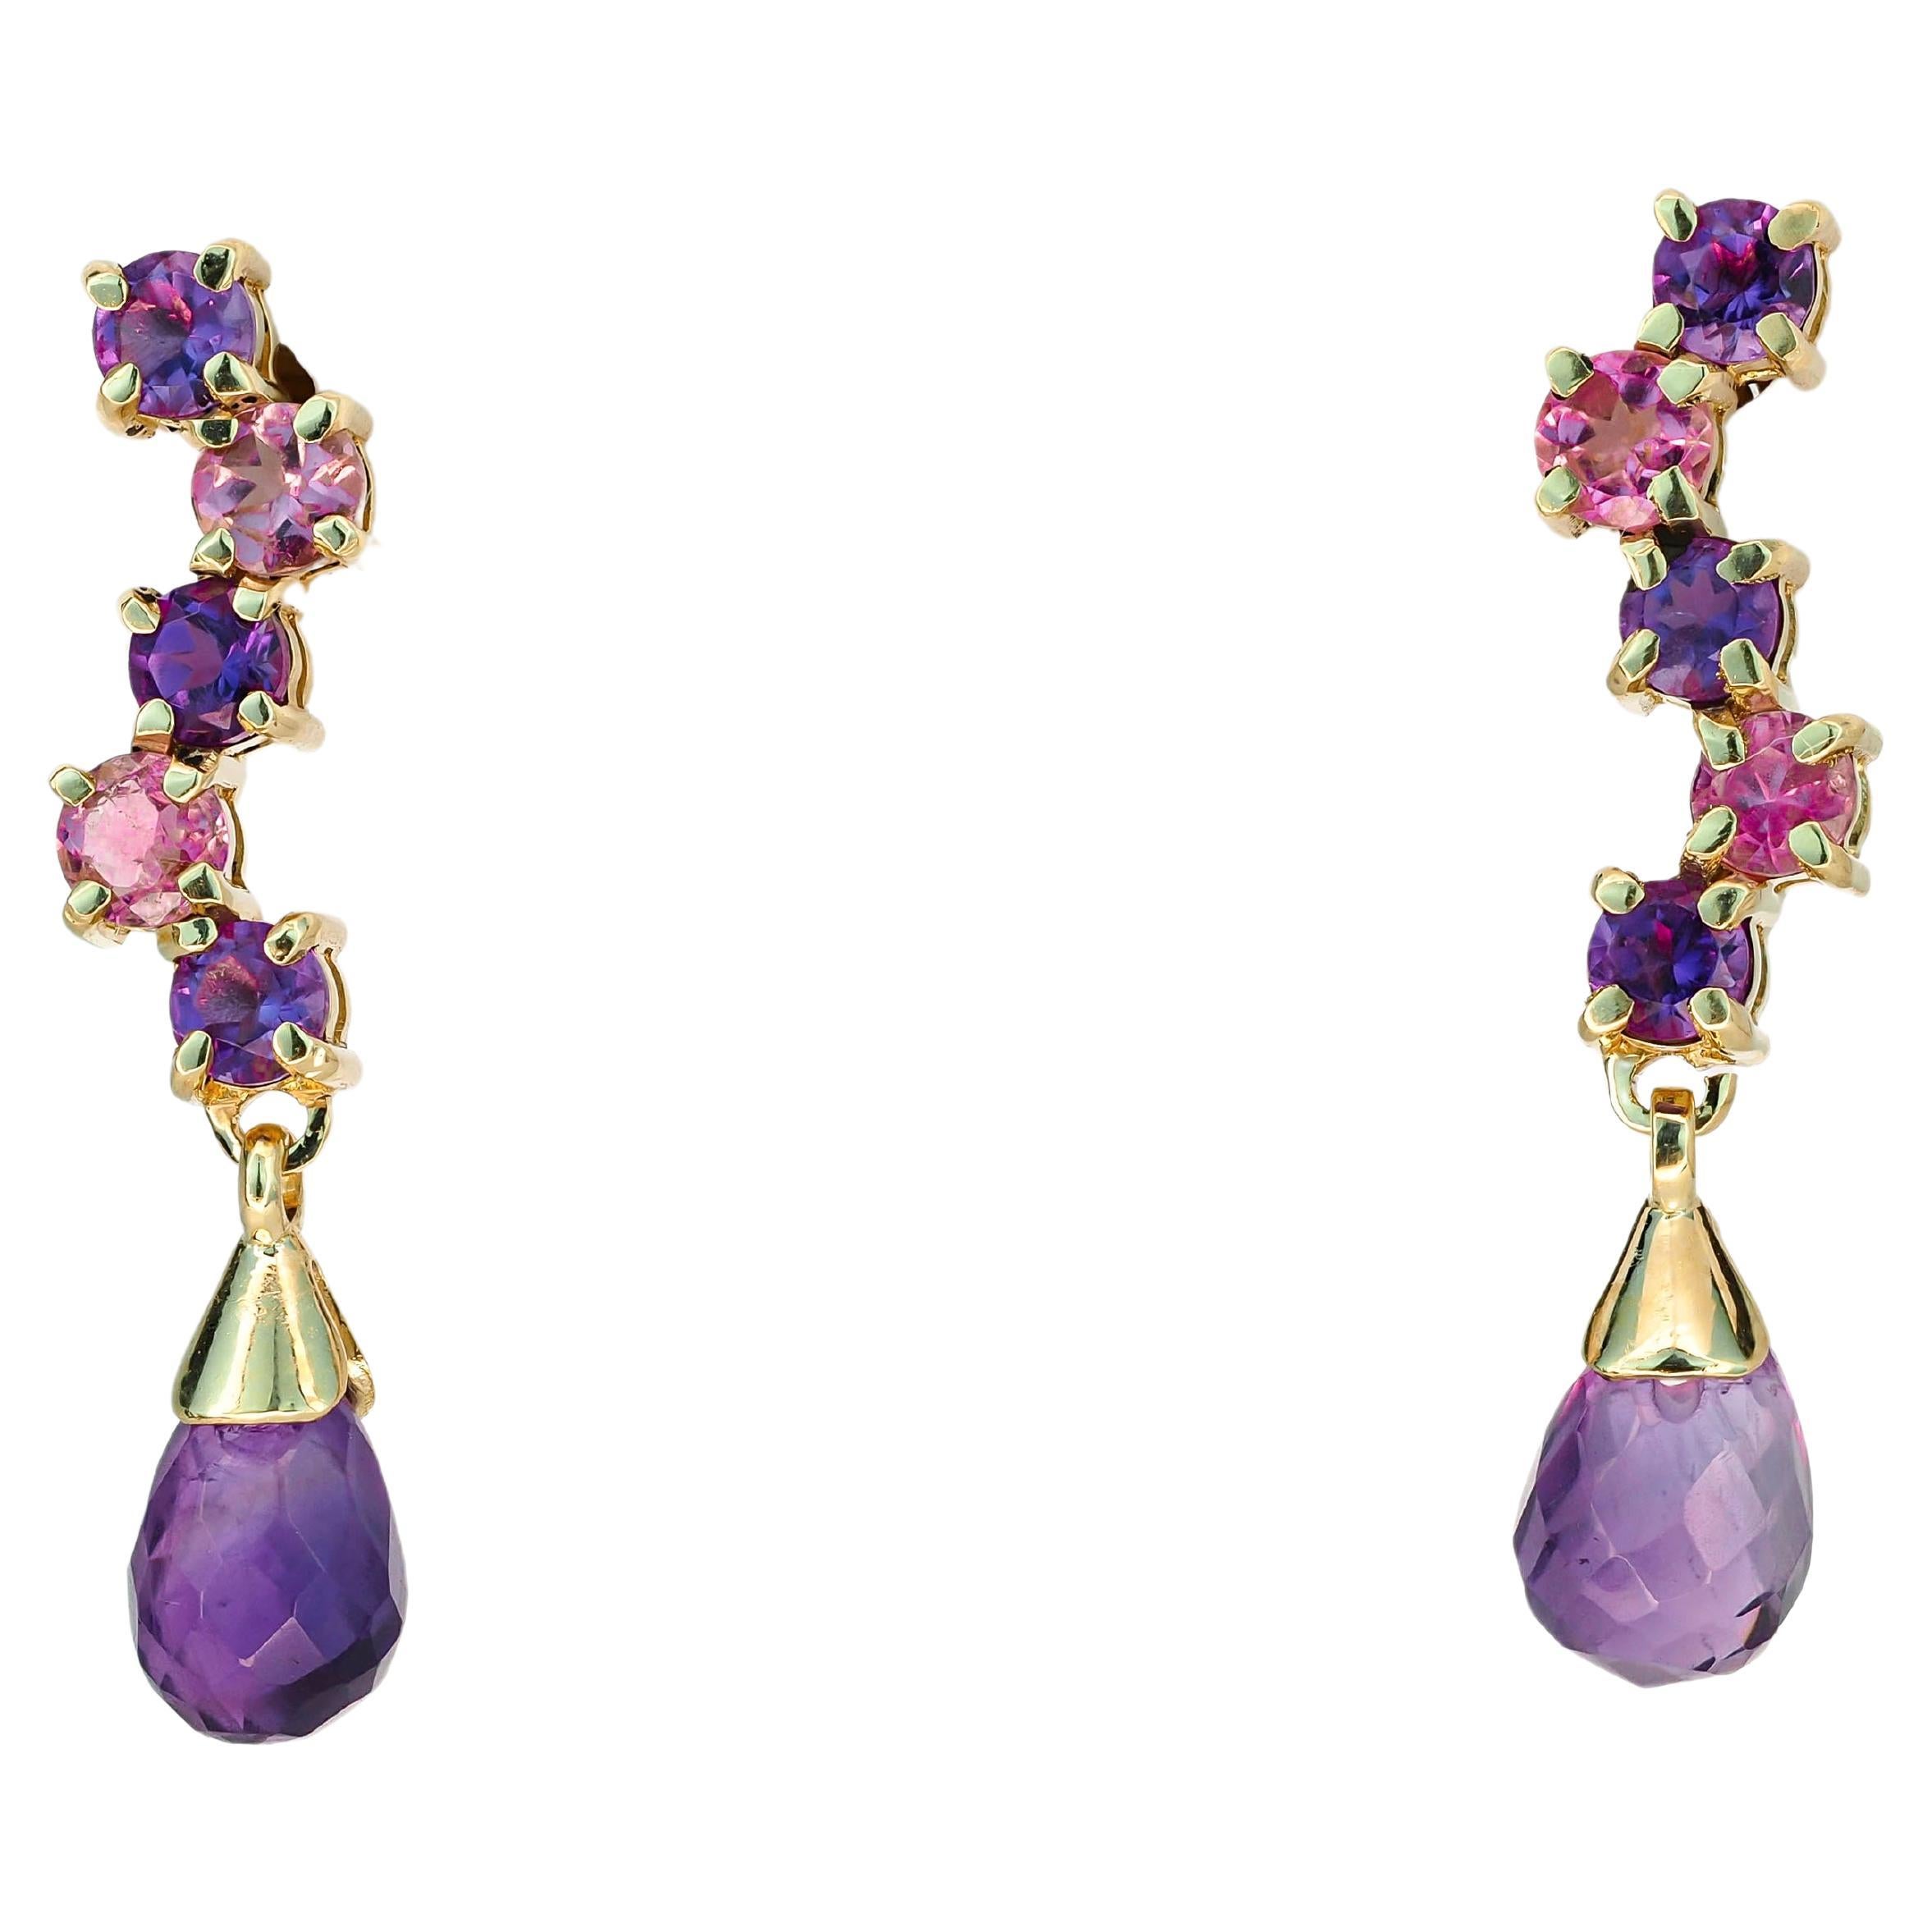 14k gold earrings with amethysts and sapphires